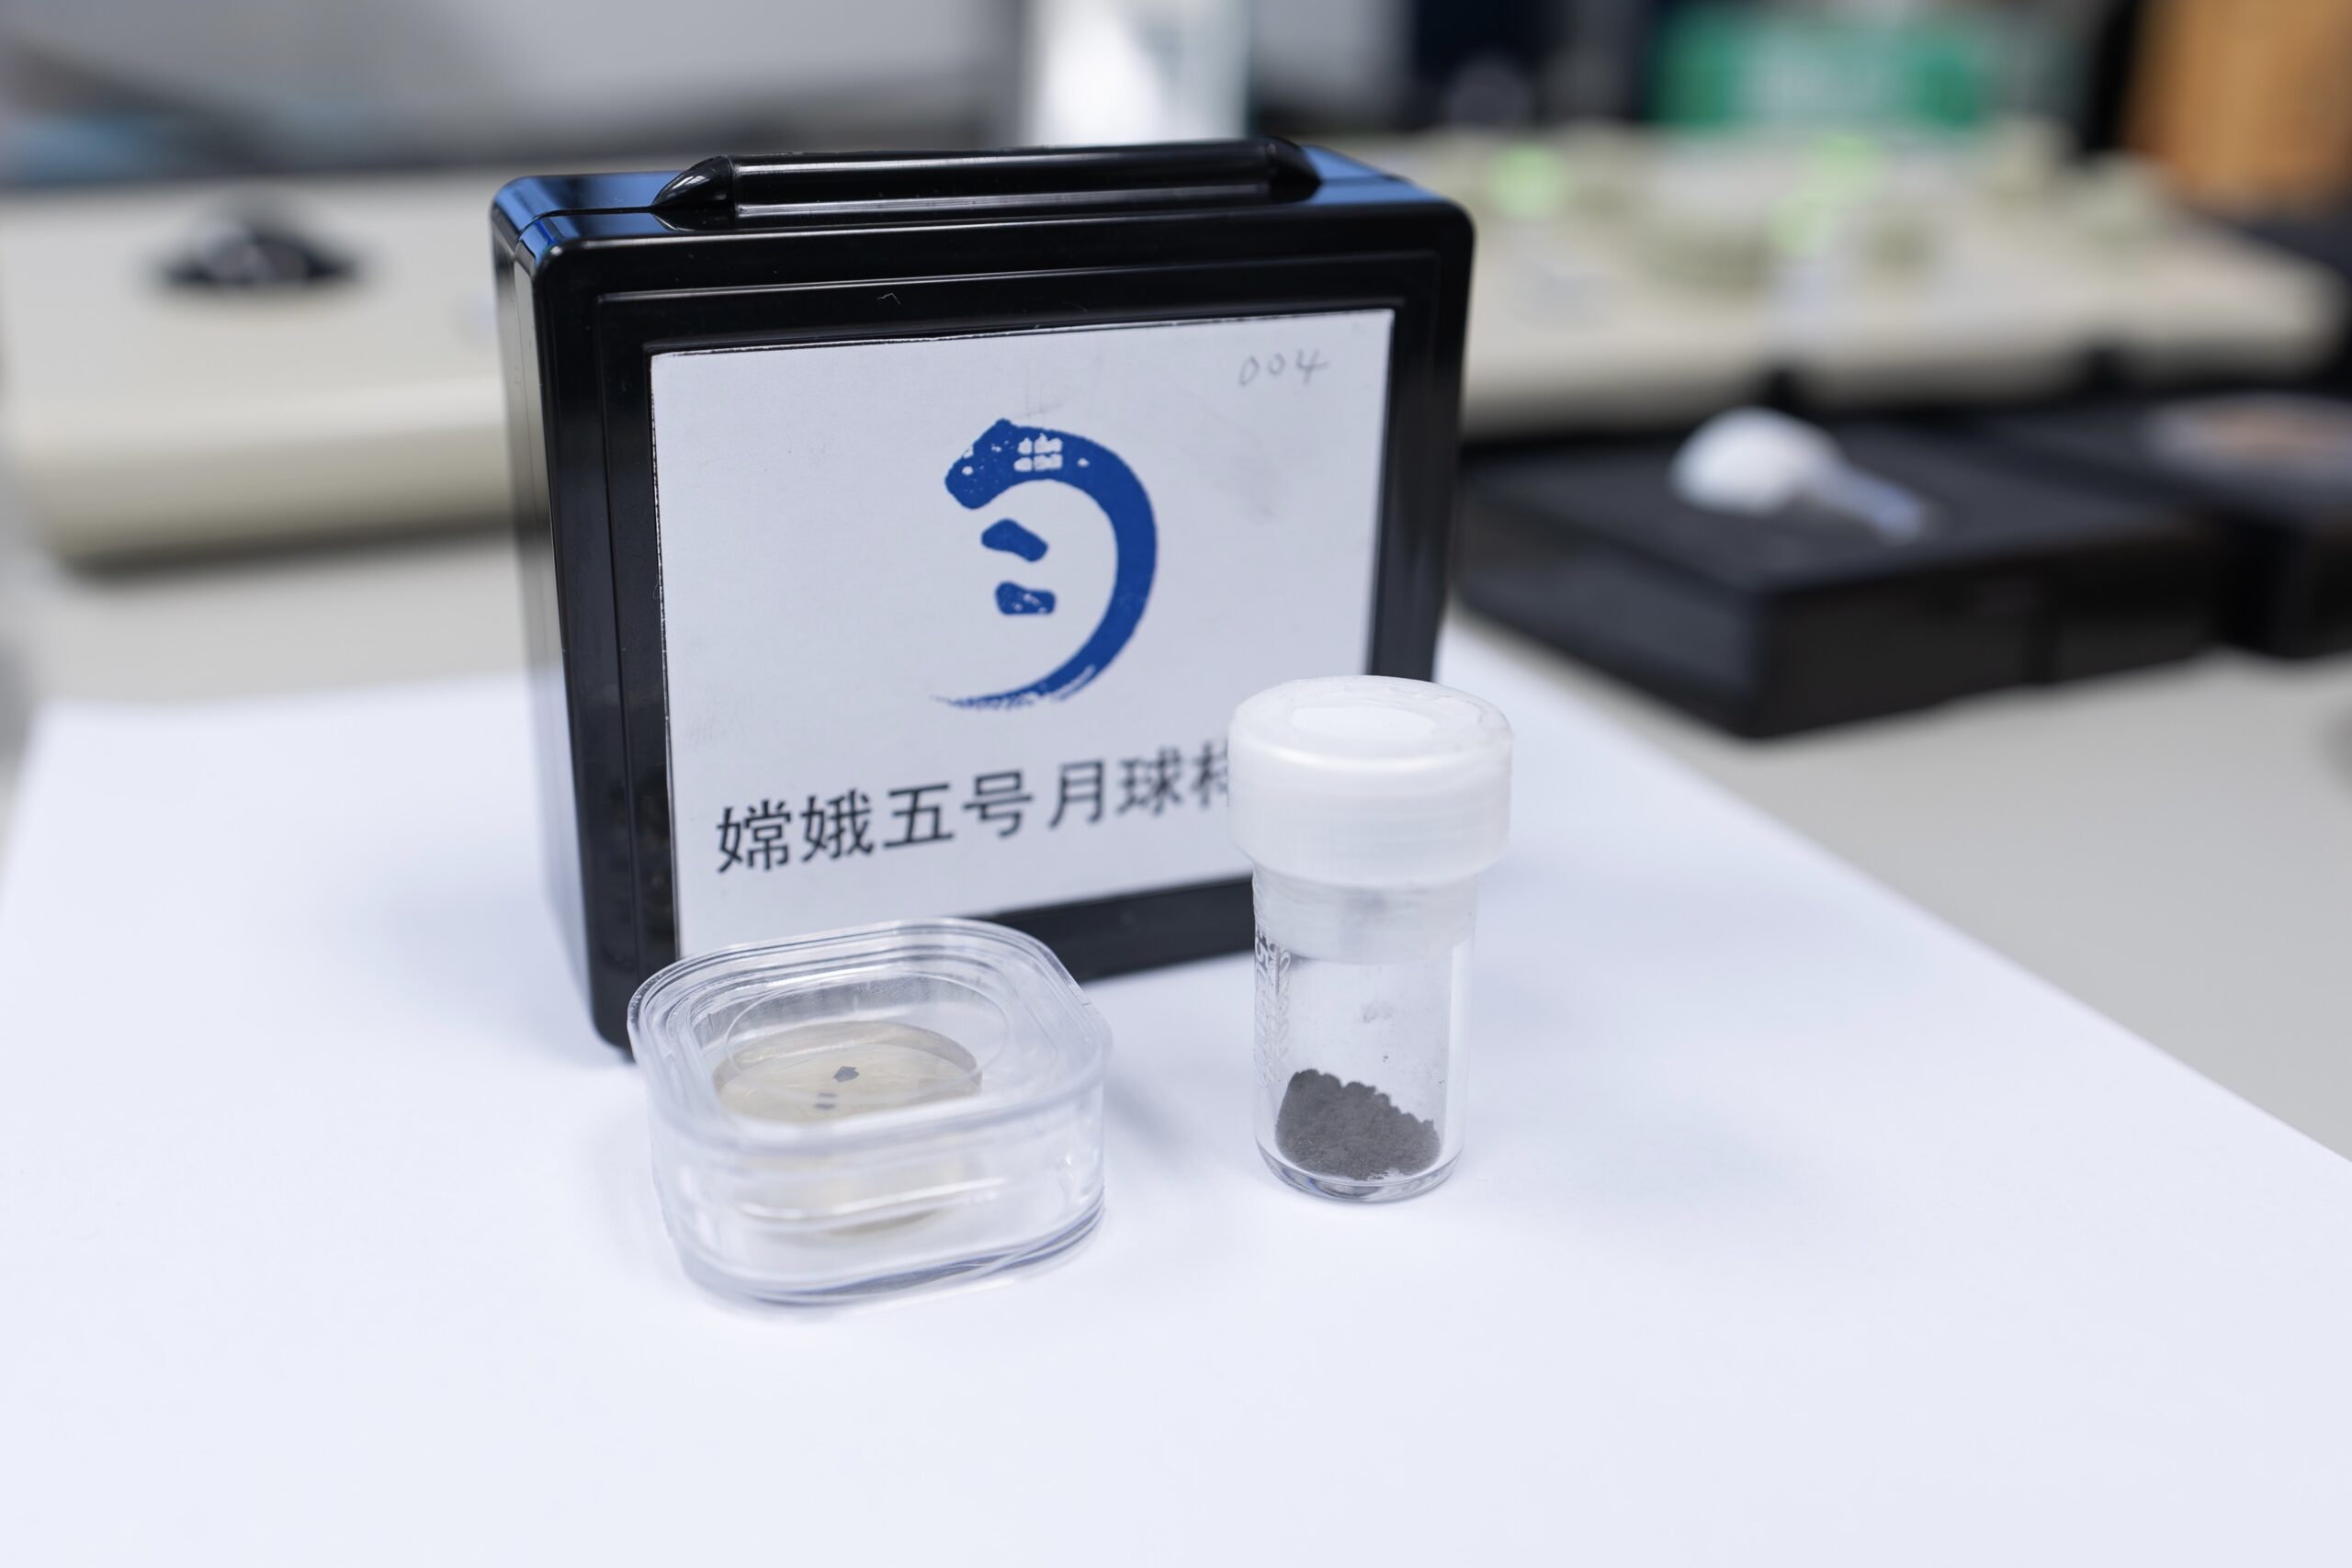 The lunar soil samples that the team at the University of Hong Kong collected from Beijing. The samples are on a white table in a research laboratory.